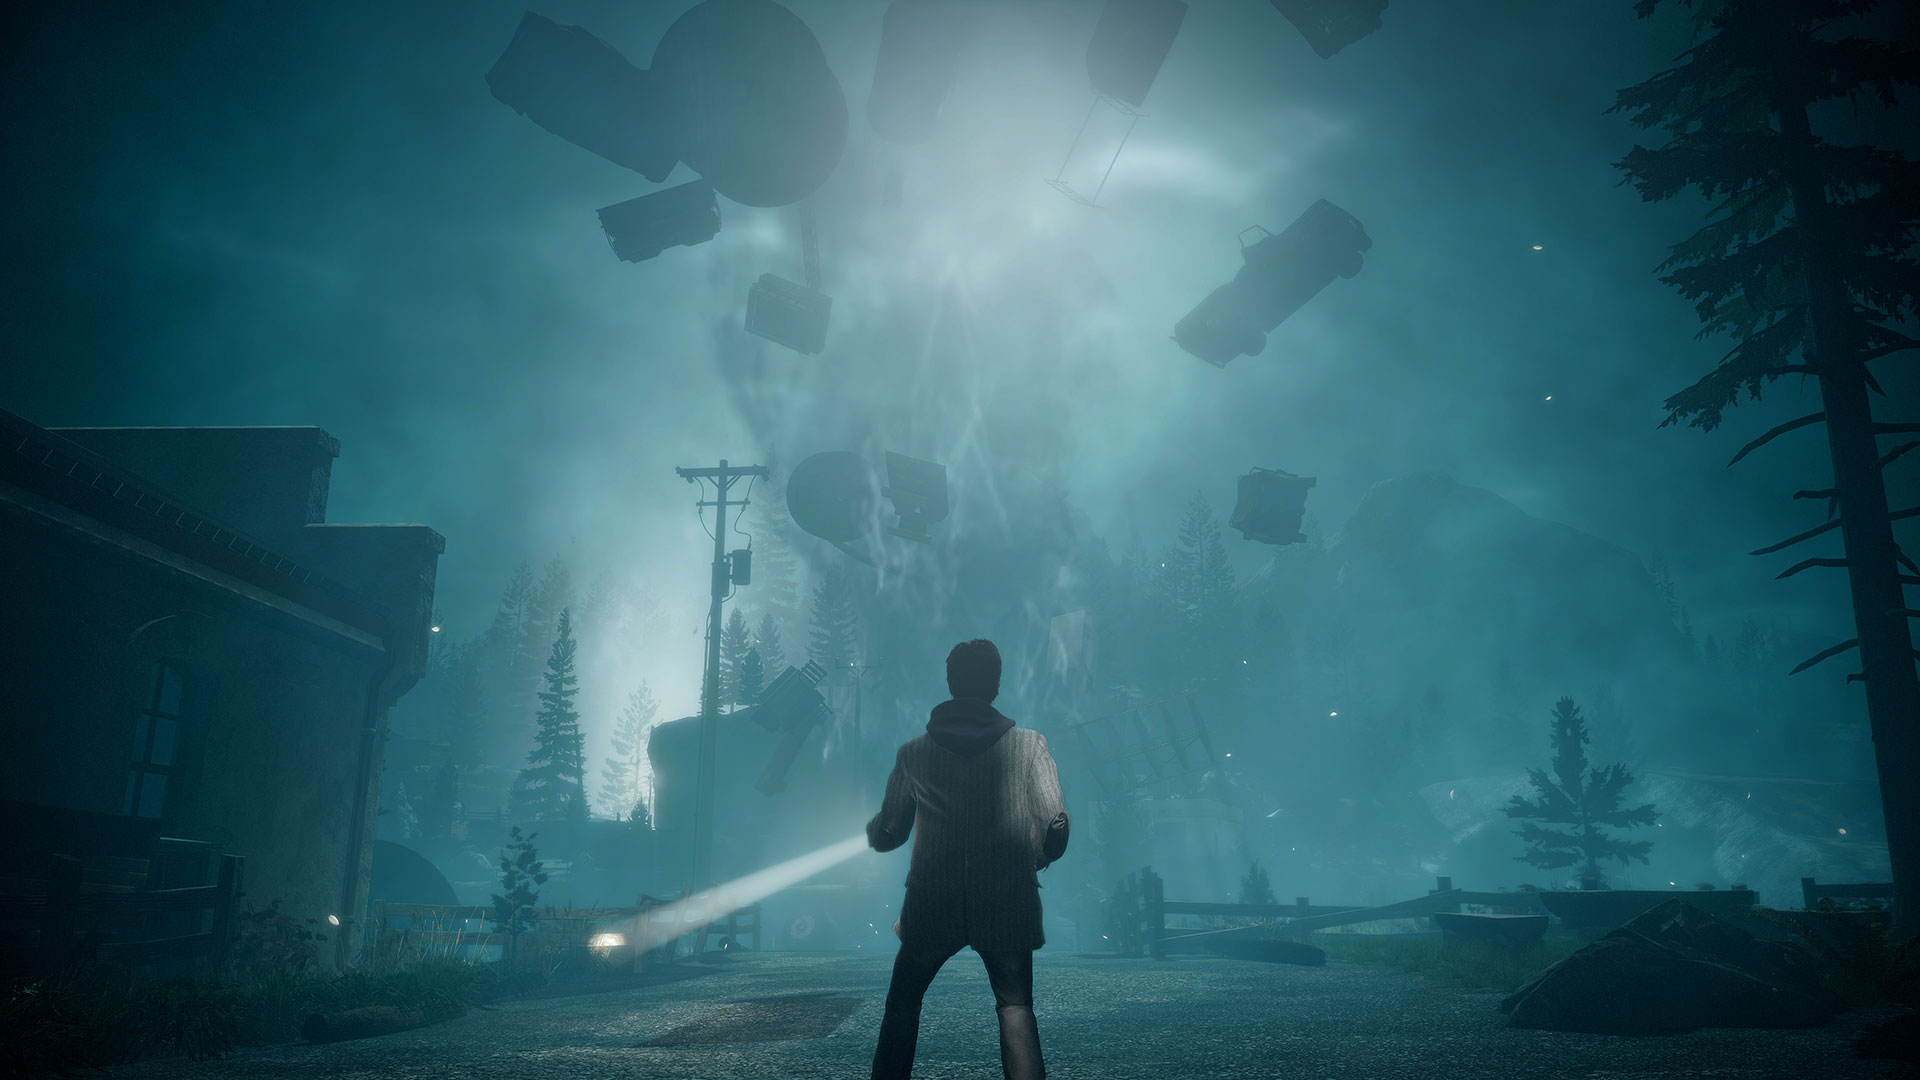 Alan Wake 2 Patch 1.06 - Full Patch Notes